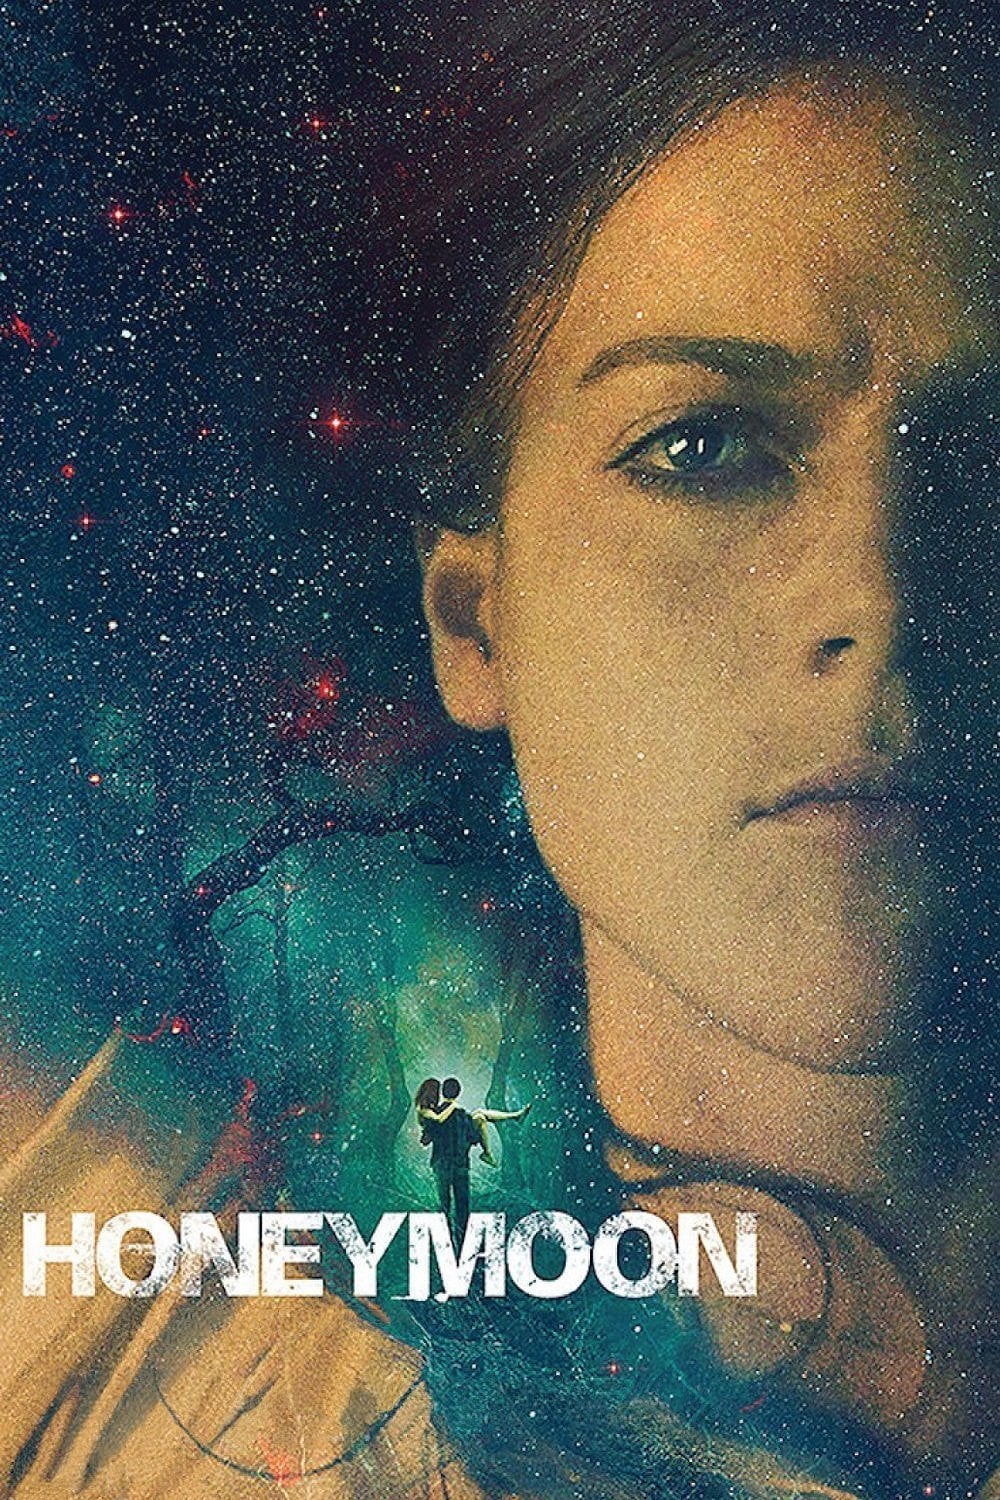 Poster for the movie "Honeymoon"